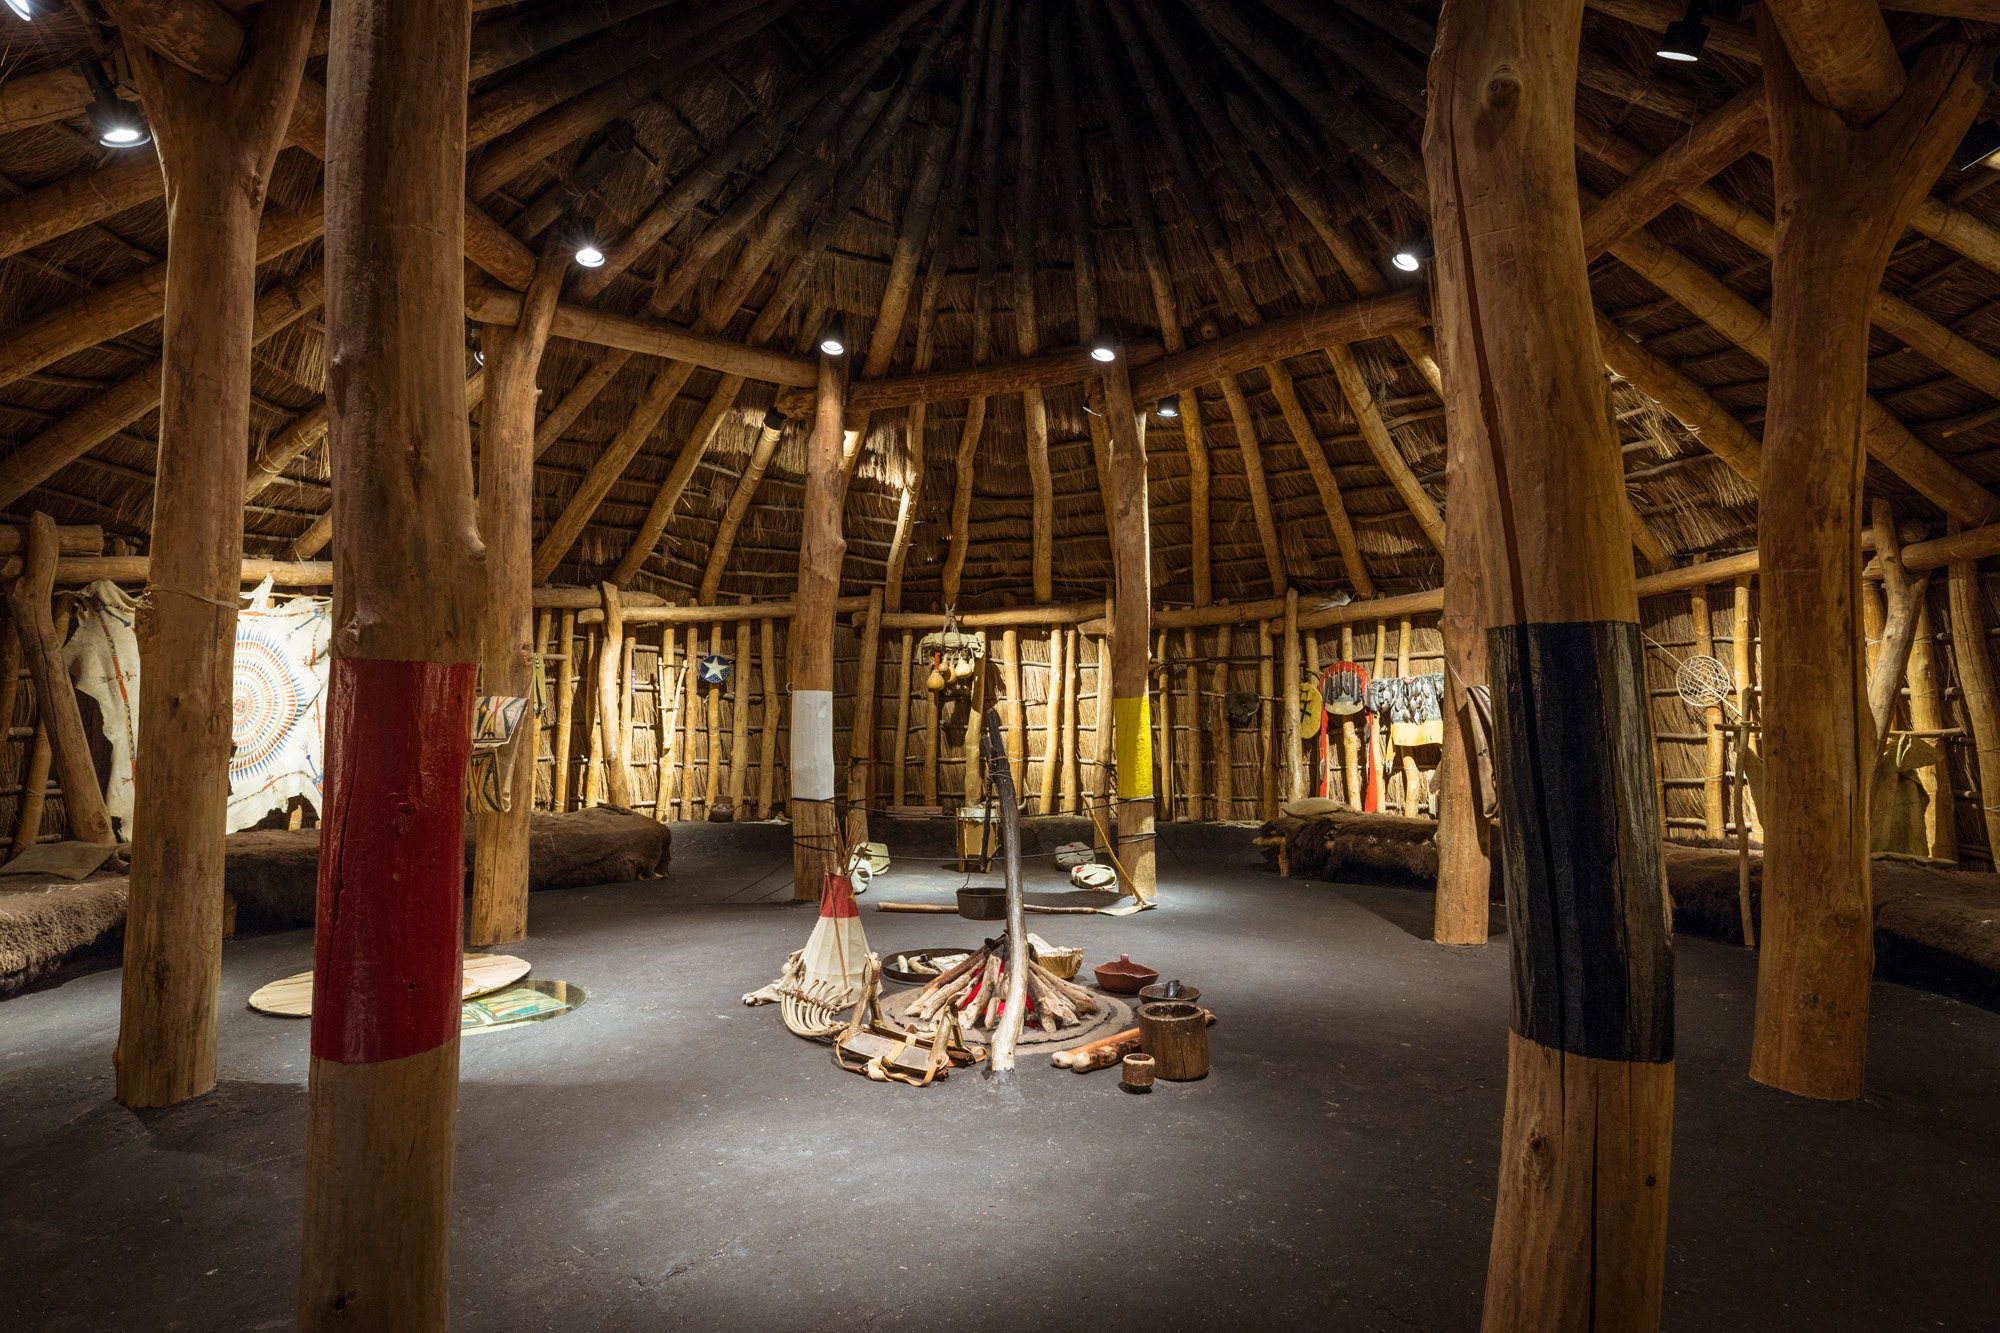 View of the circular interior of the Pawnee Earth Lodge, with various replica objects displayed around the circular hearth in the center and on the walls.